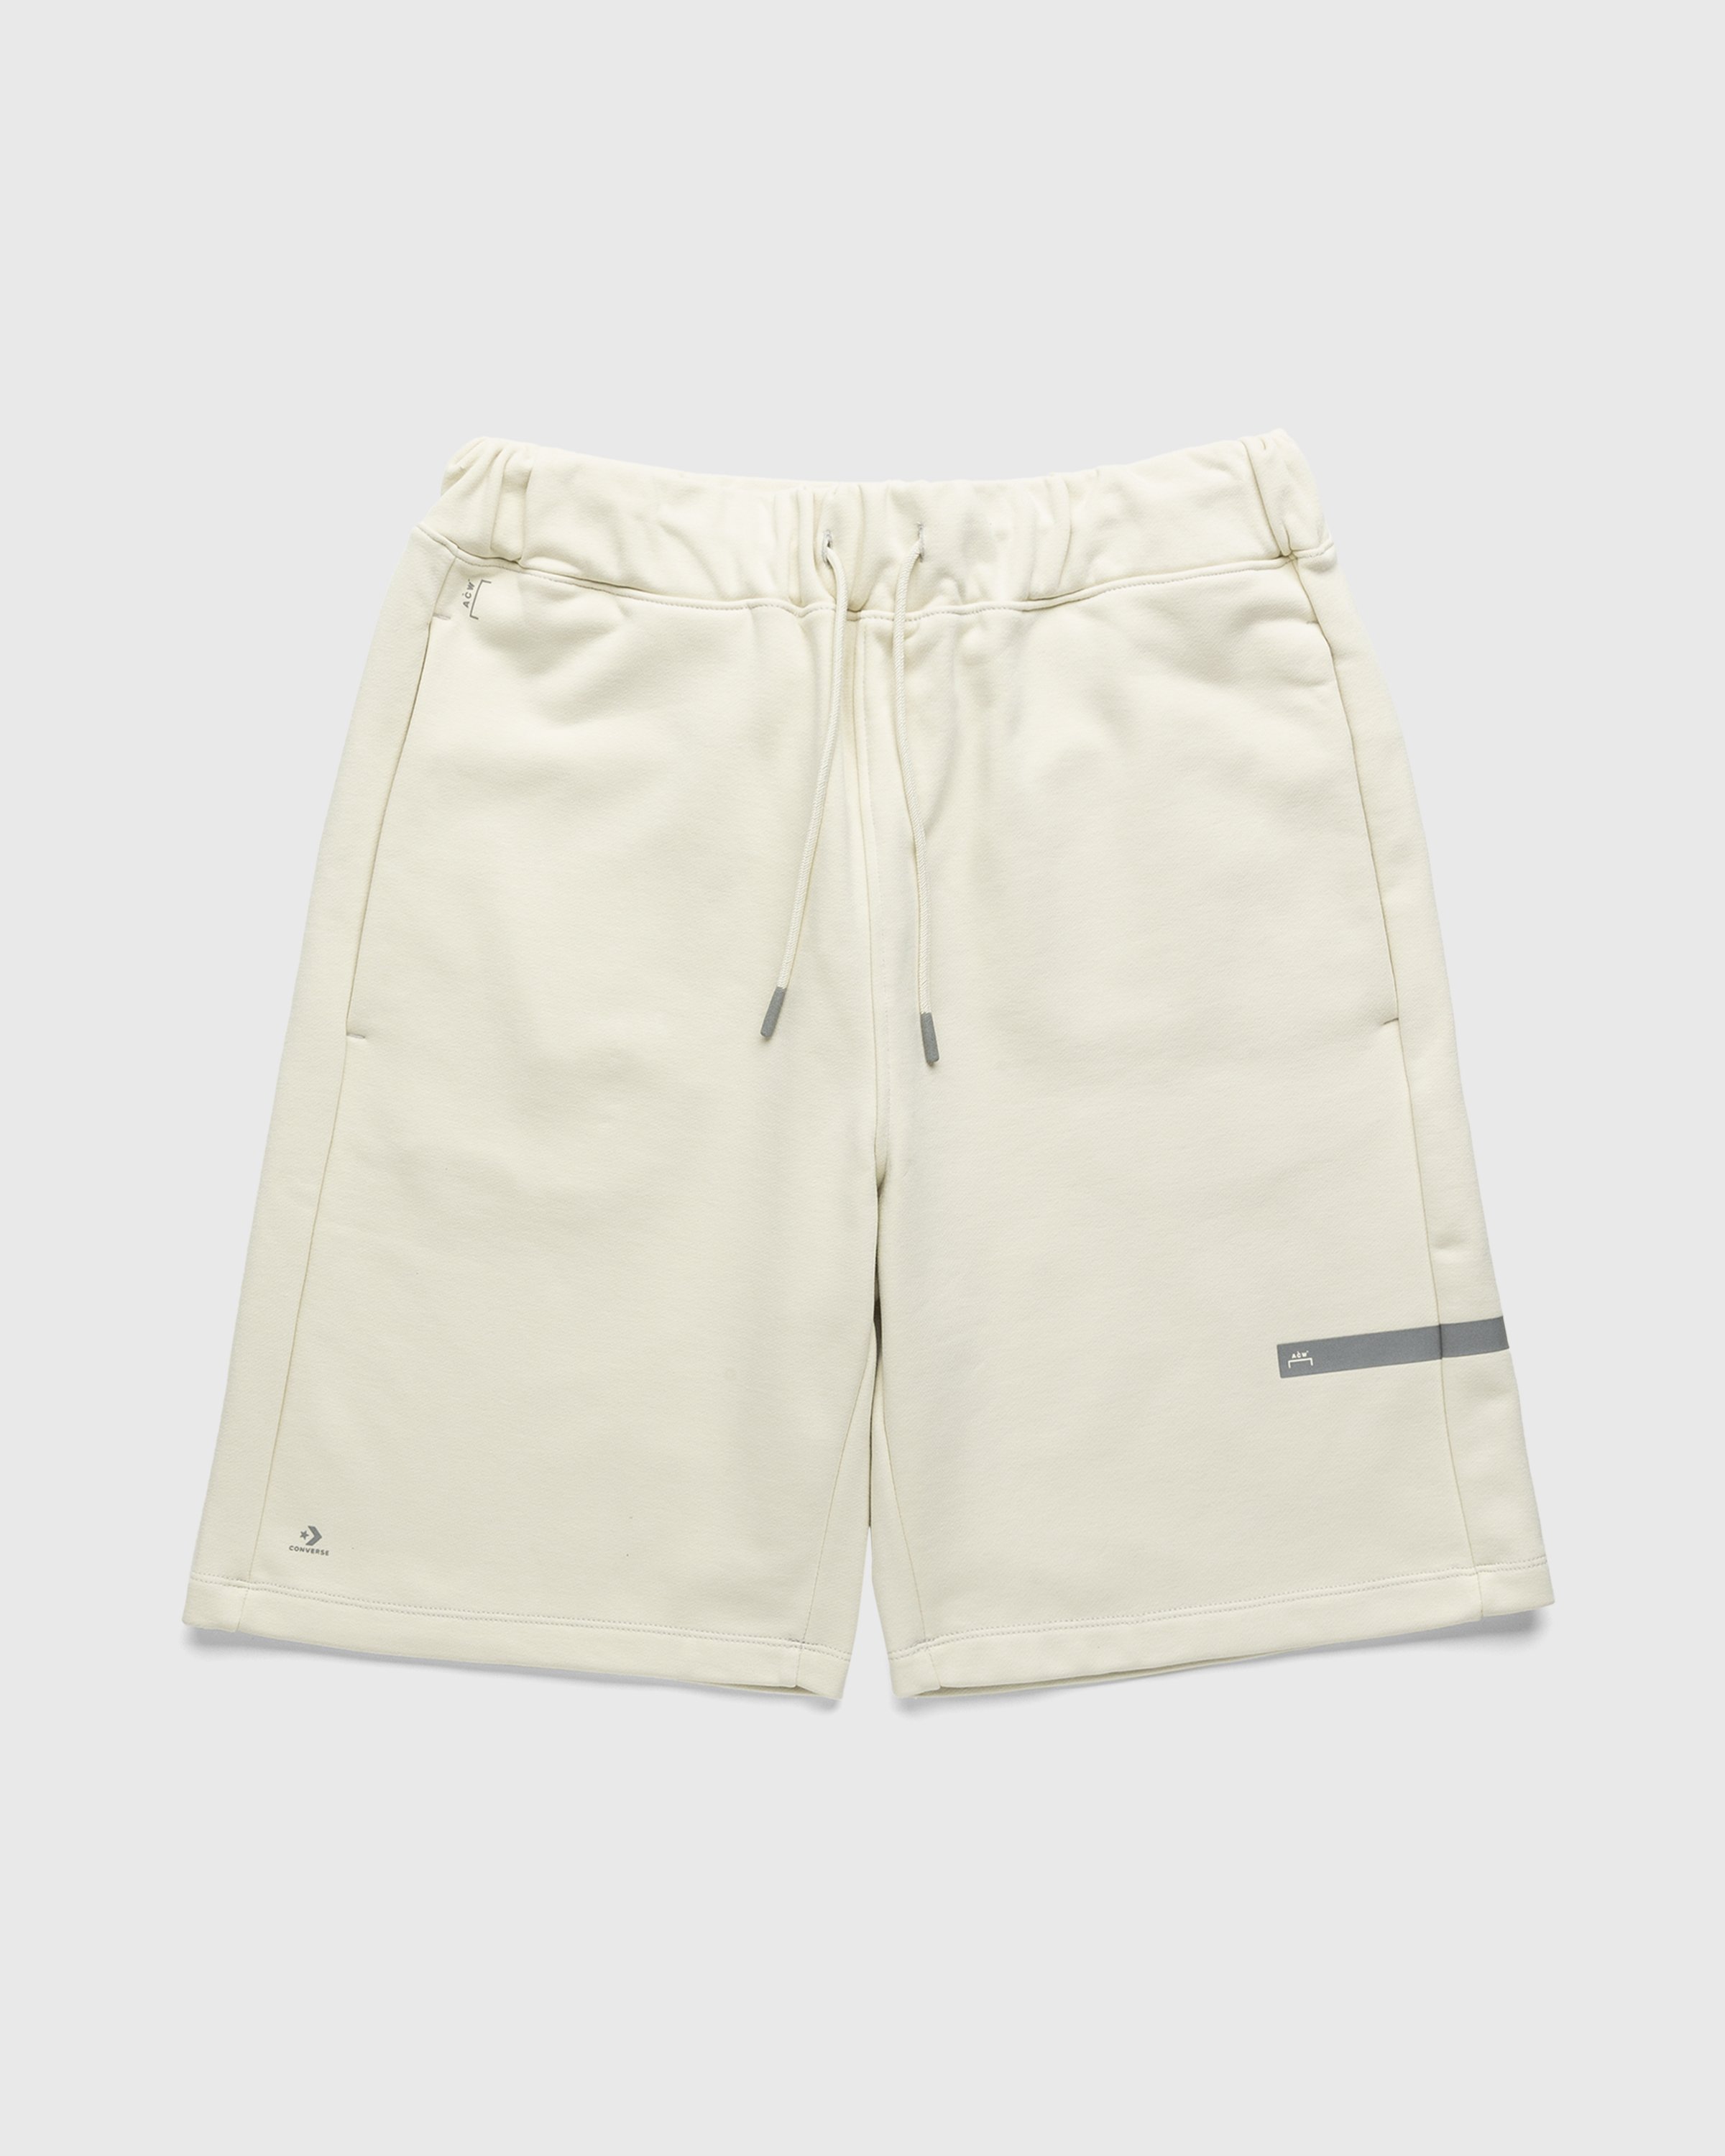 Converse x A-Cold-Wall* - Reflective Short Bone White - Clothing - White - Image 1